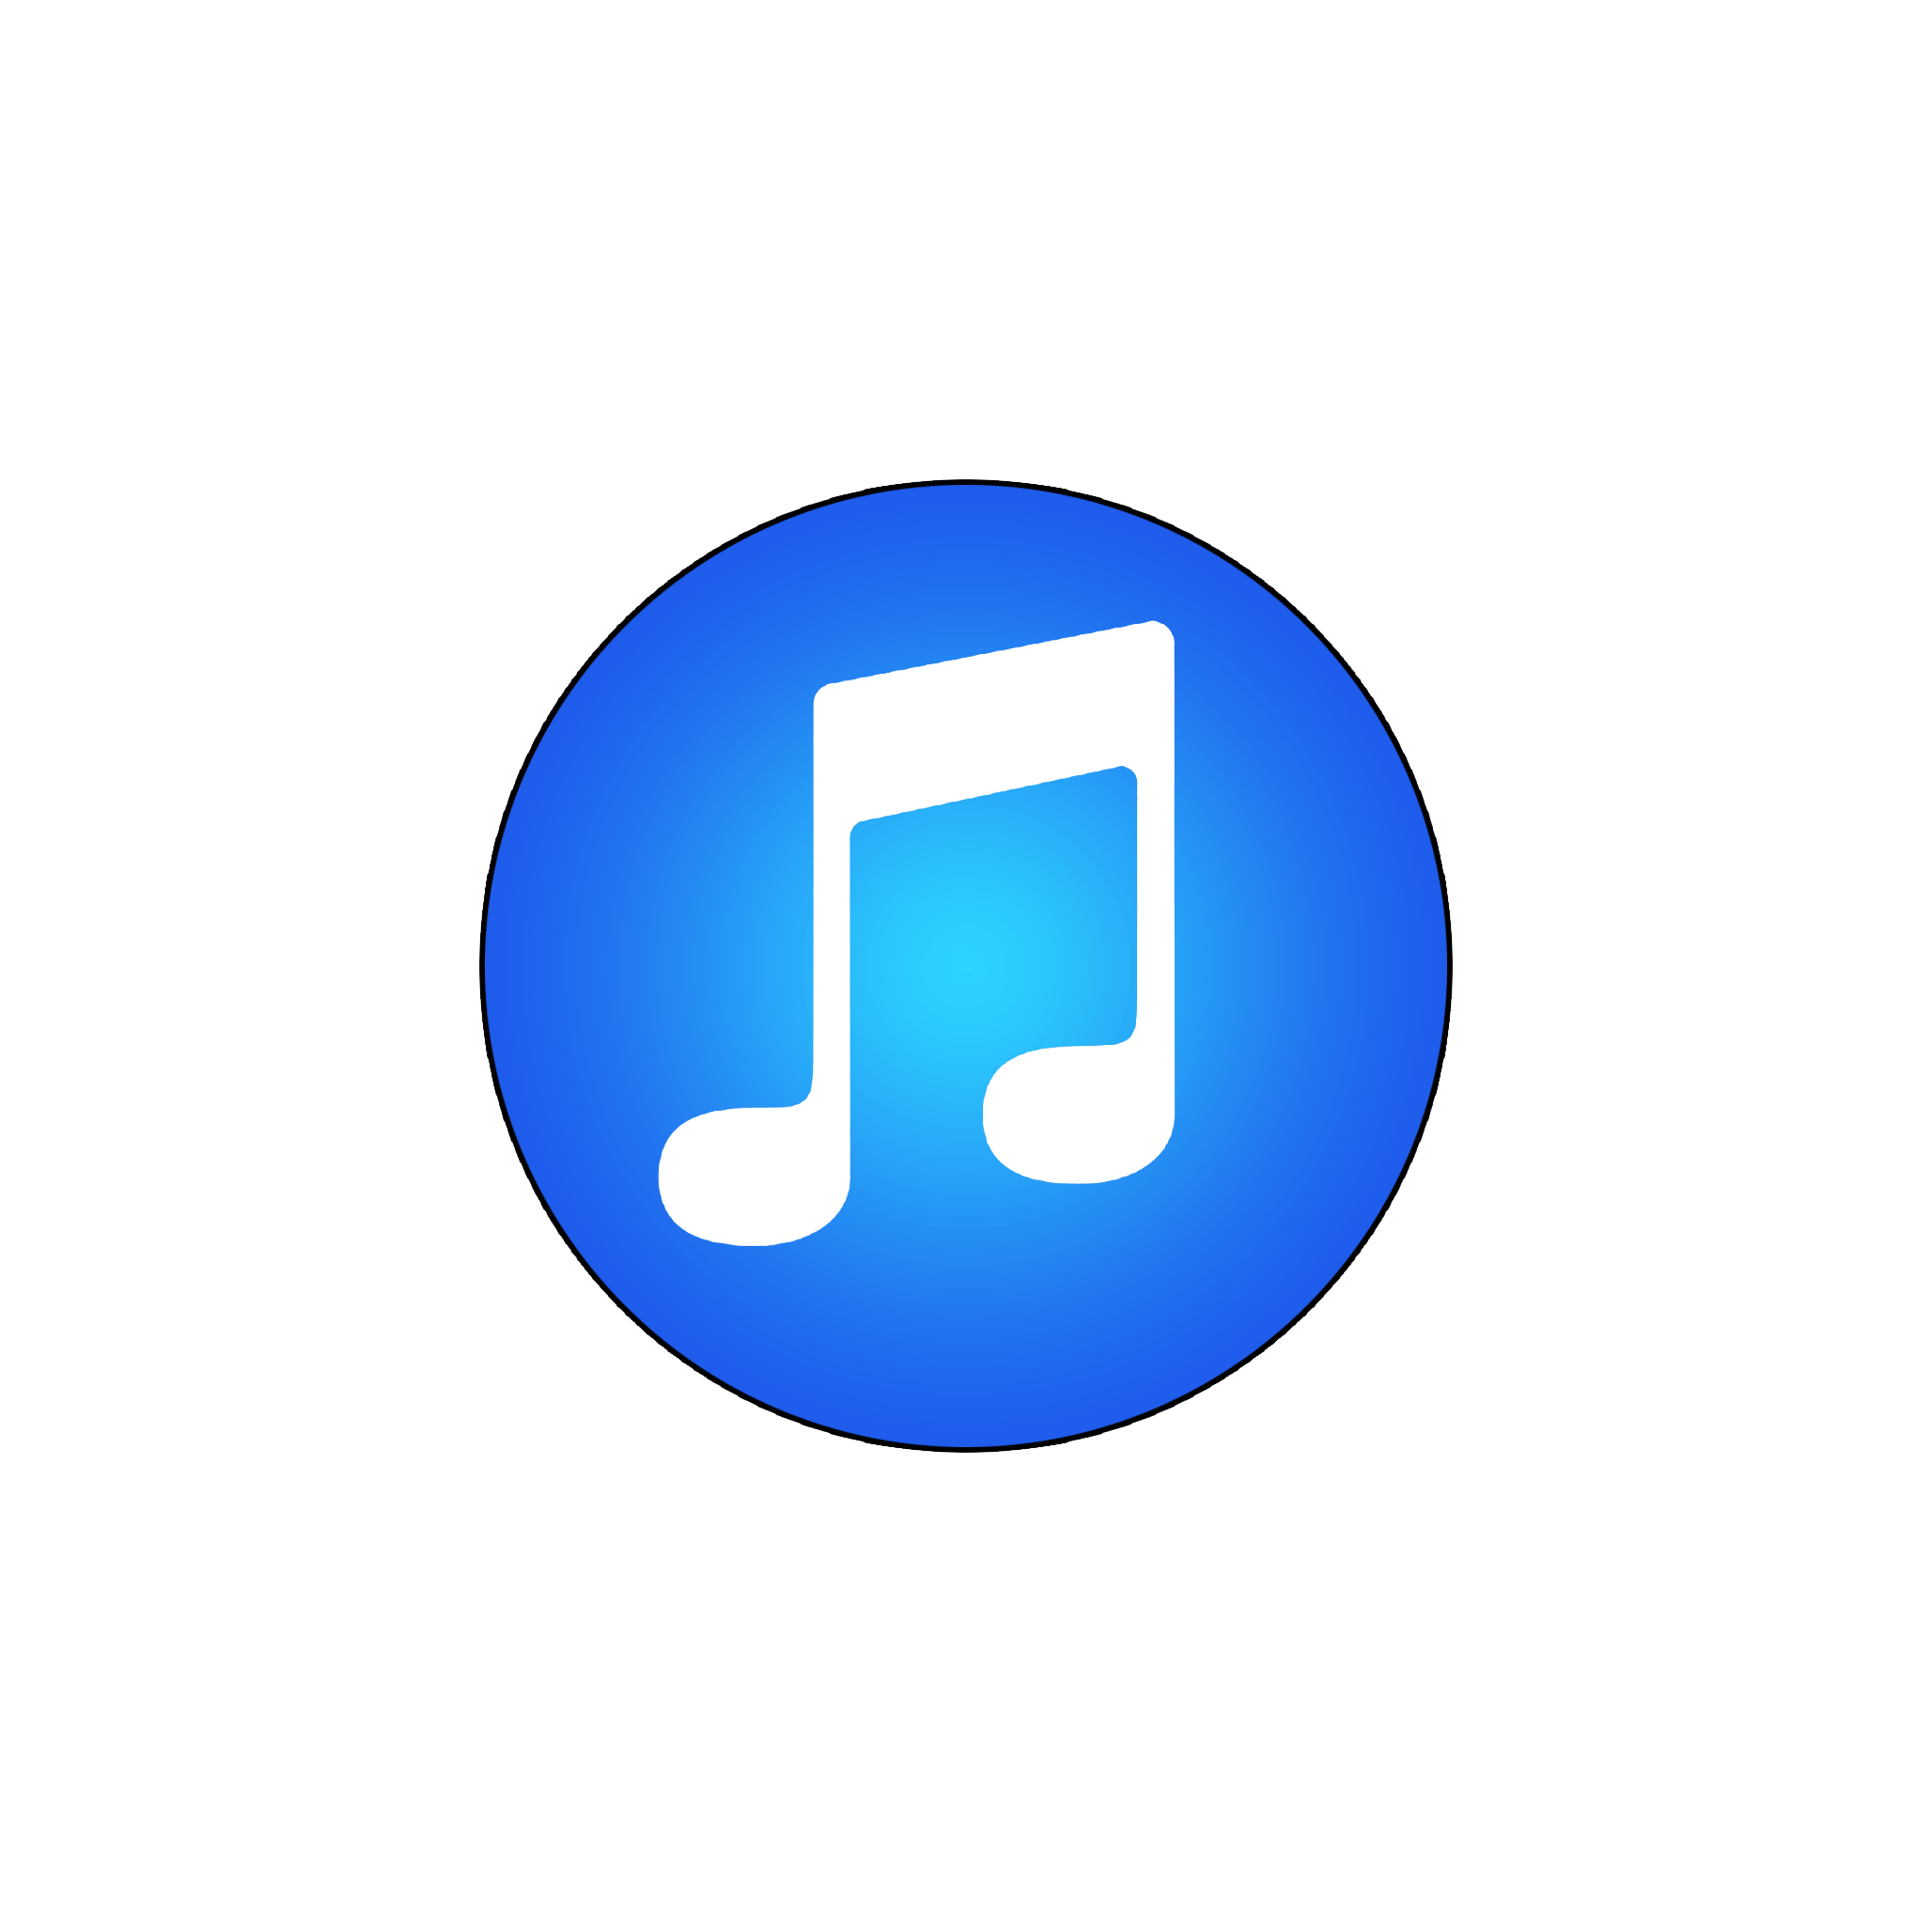 iTunes 12 Logo - Free Itunes Icon Png 210073 | Download Itunes Icon Png - 210073